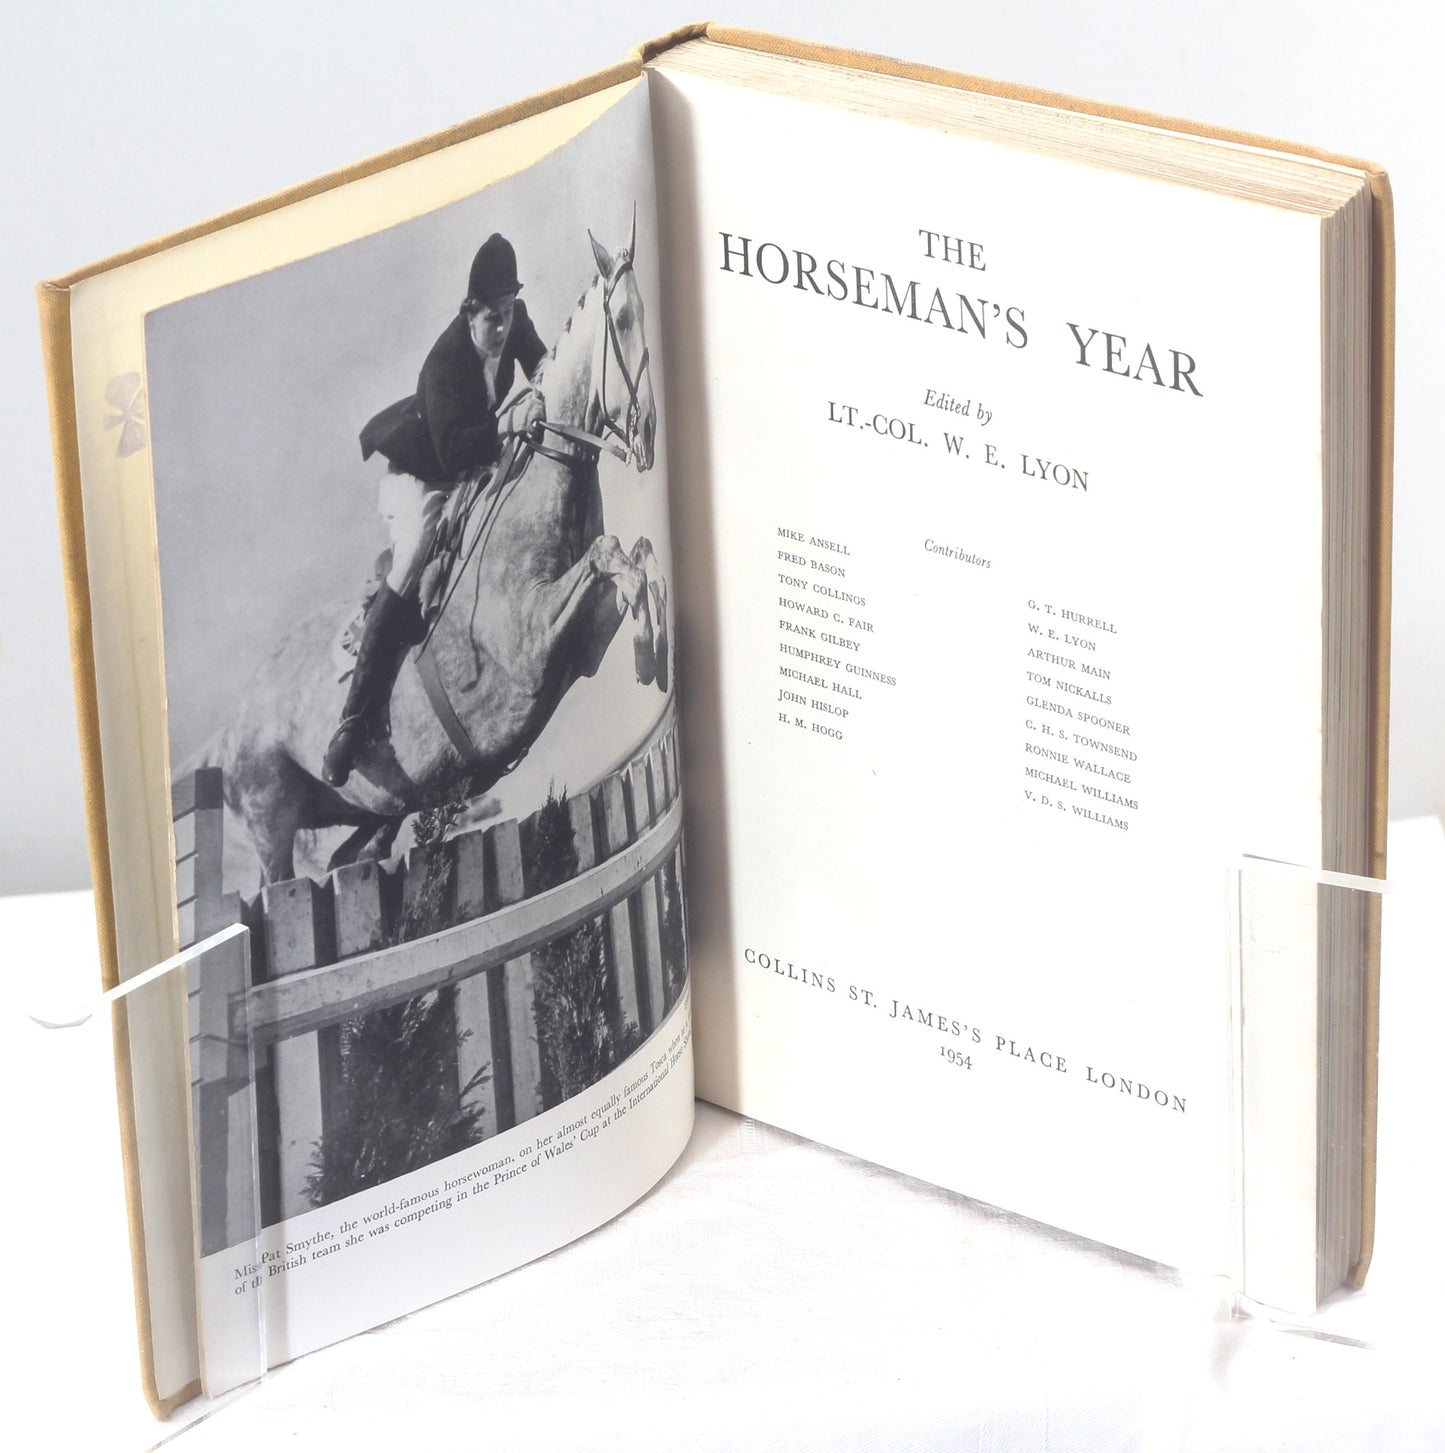 The Horseman's Year 1953-54, Edited by Lt.Col. W.E.Lyon